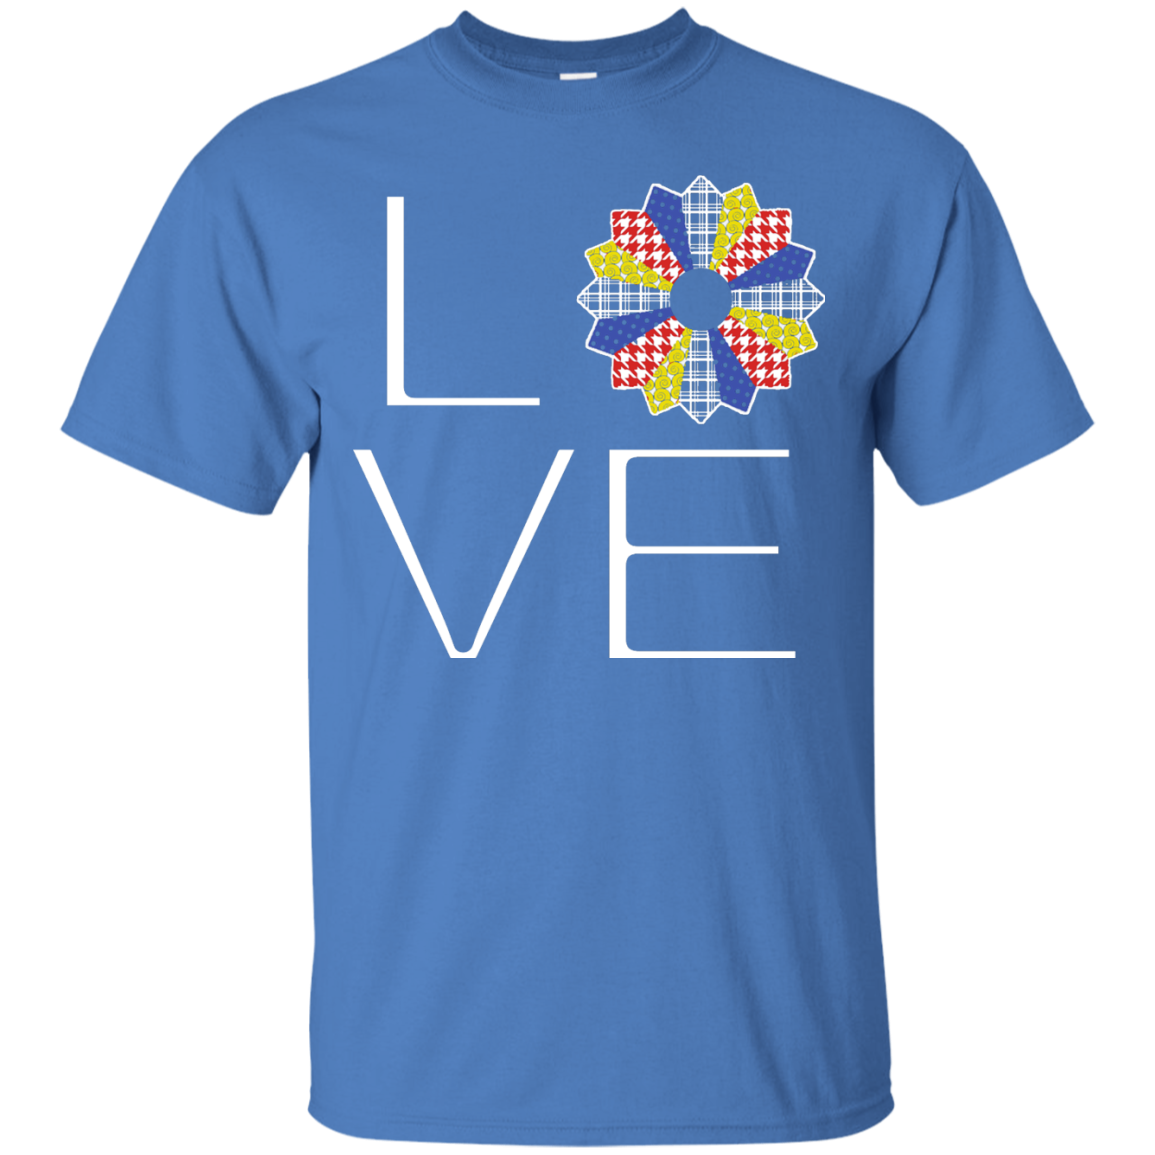 LOVE Quilting (Primary Colors) Custom Ultra Cotton T-Shirt - Crafter4Life - 4